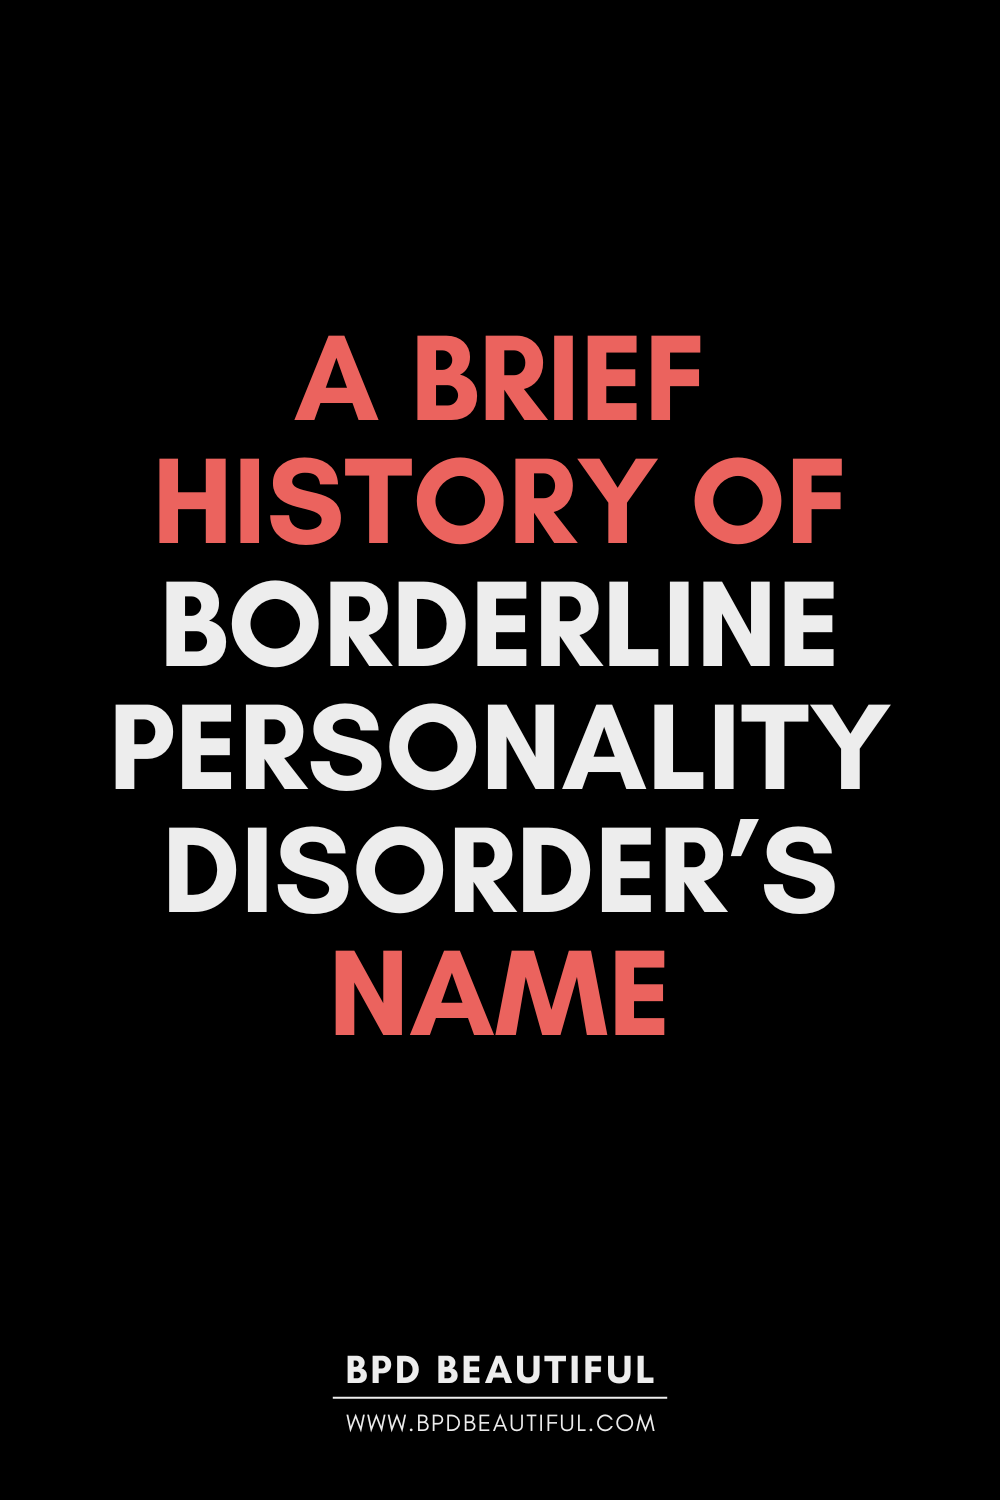 a brief history of borderline personality disorders name blog post graphic on bpdbeautiful - a BPD recovery blog